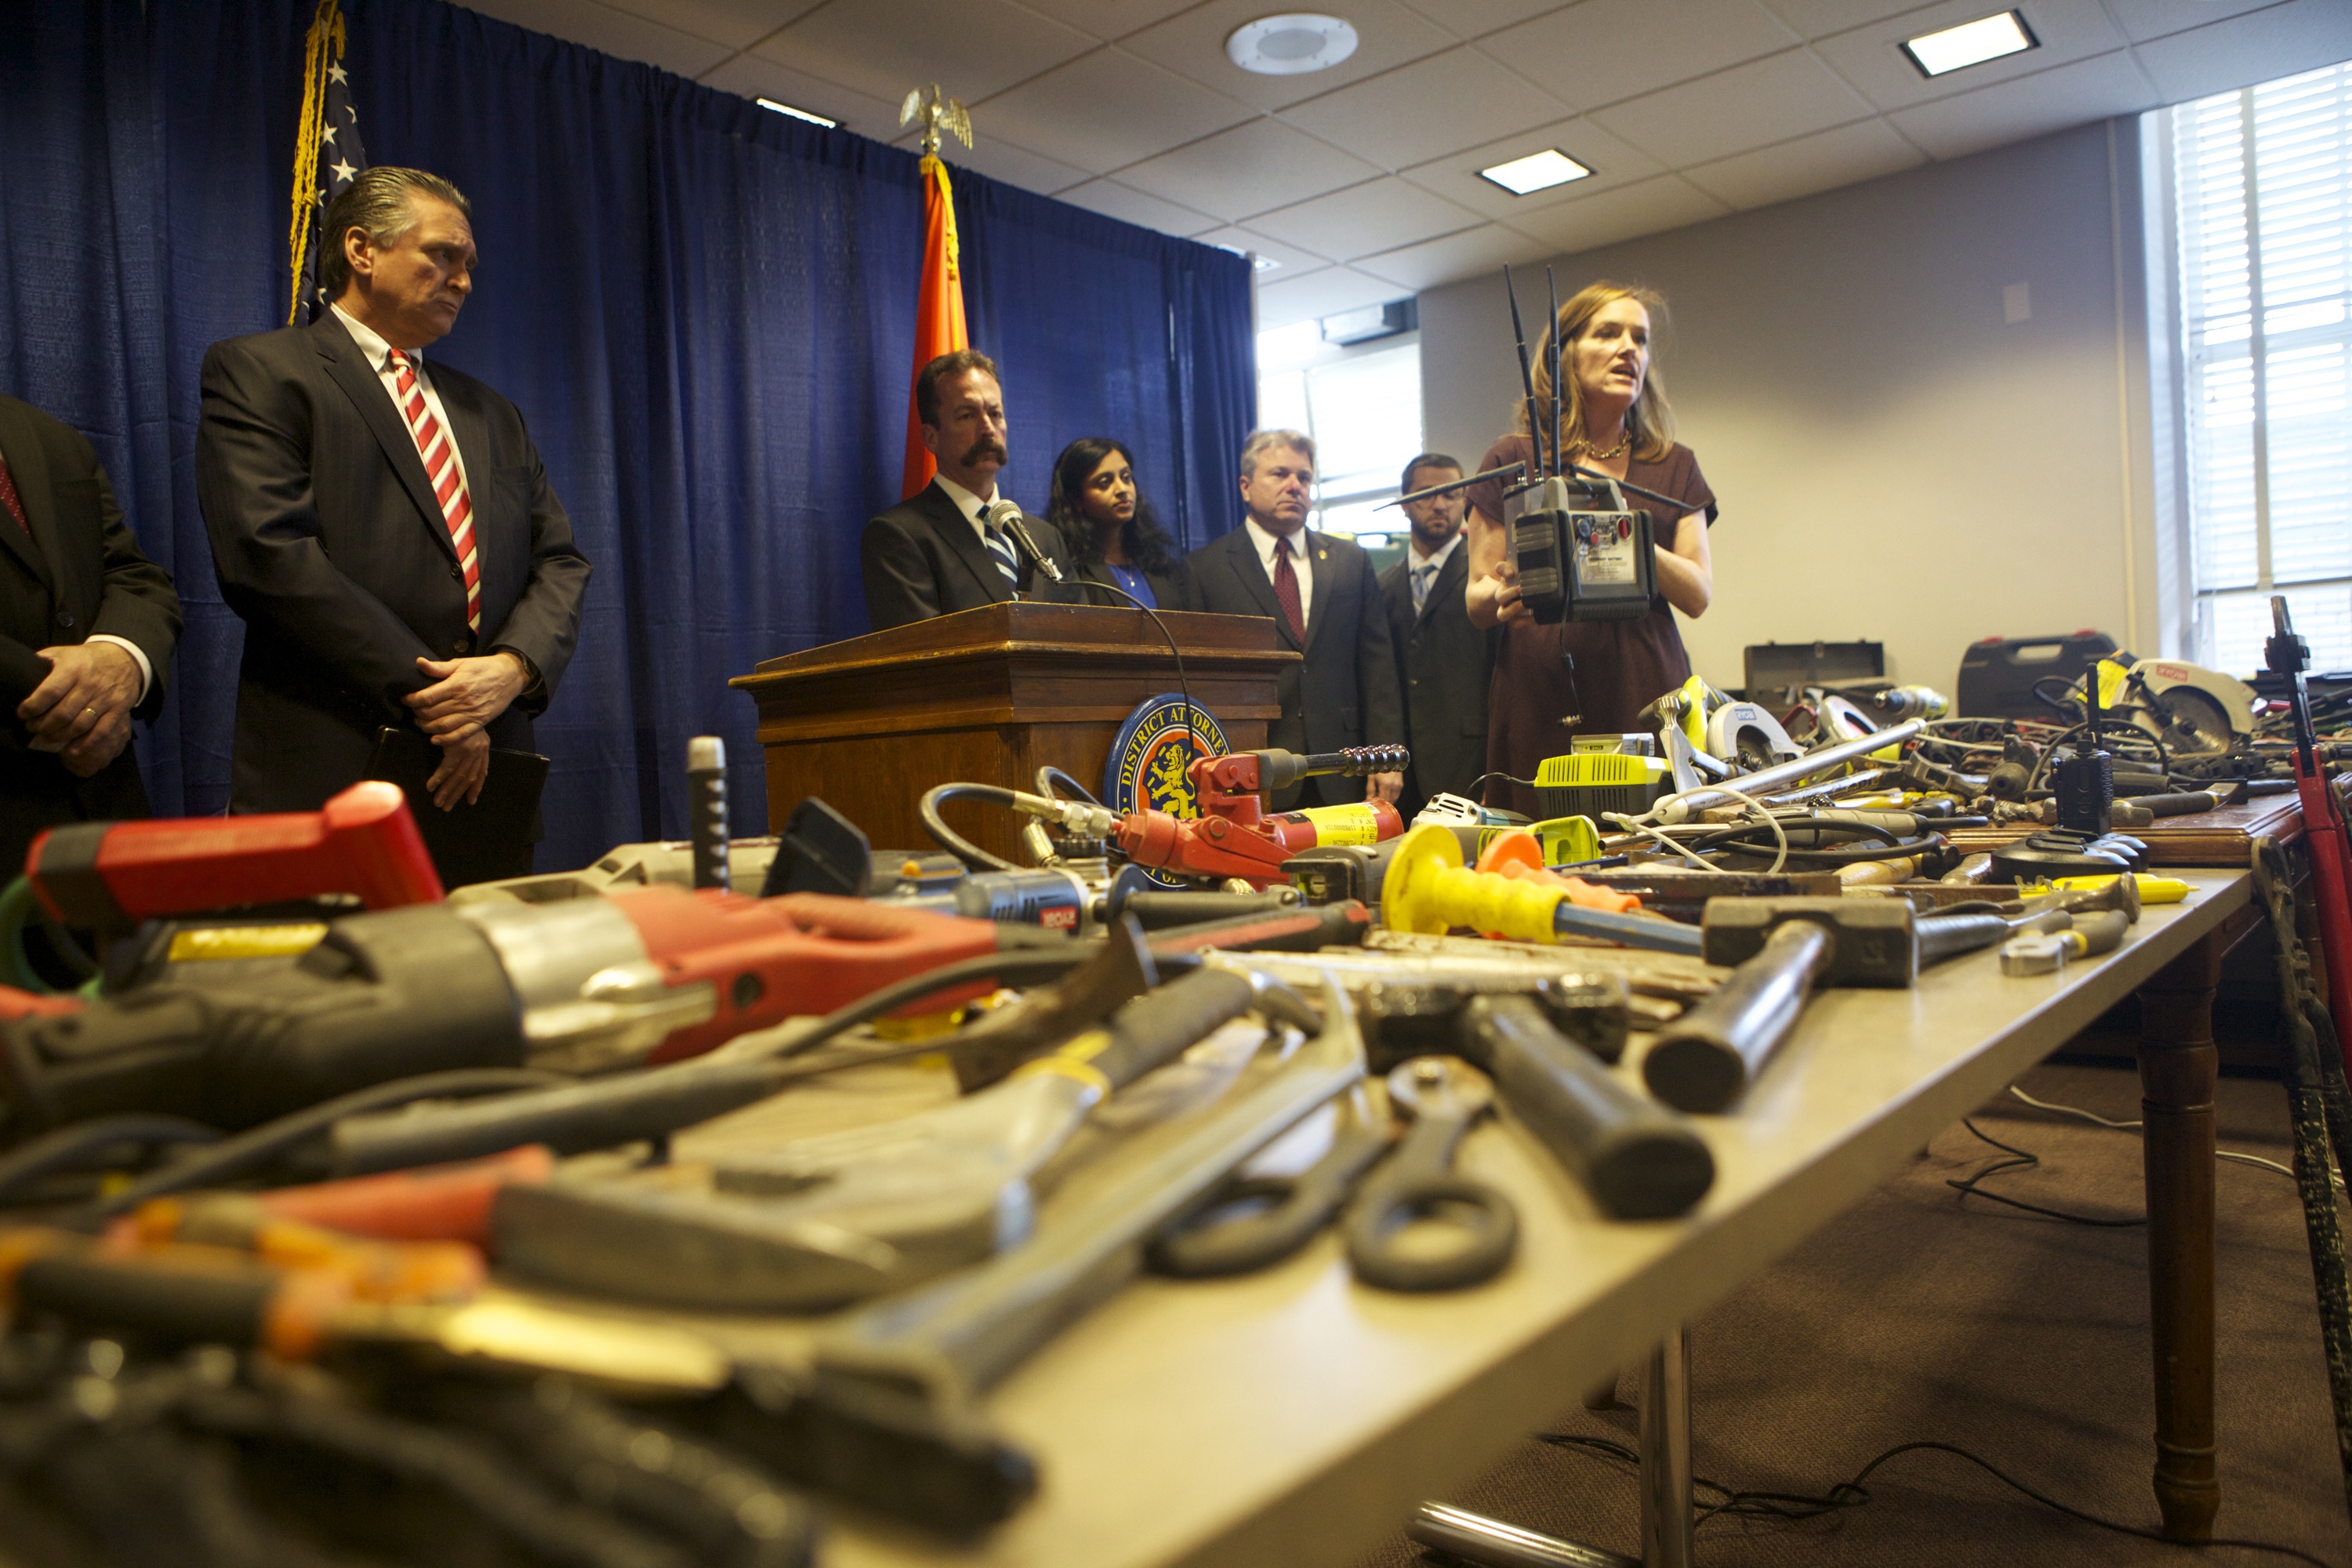 DA Rice holds a cellphone jammer used in a burglary ring